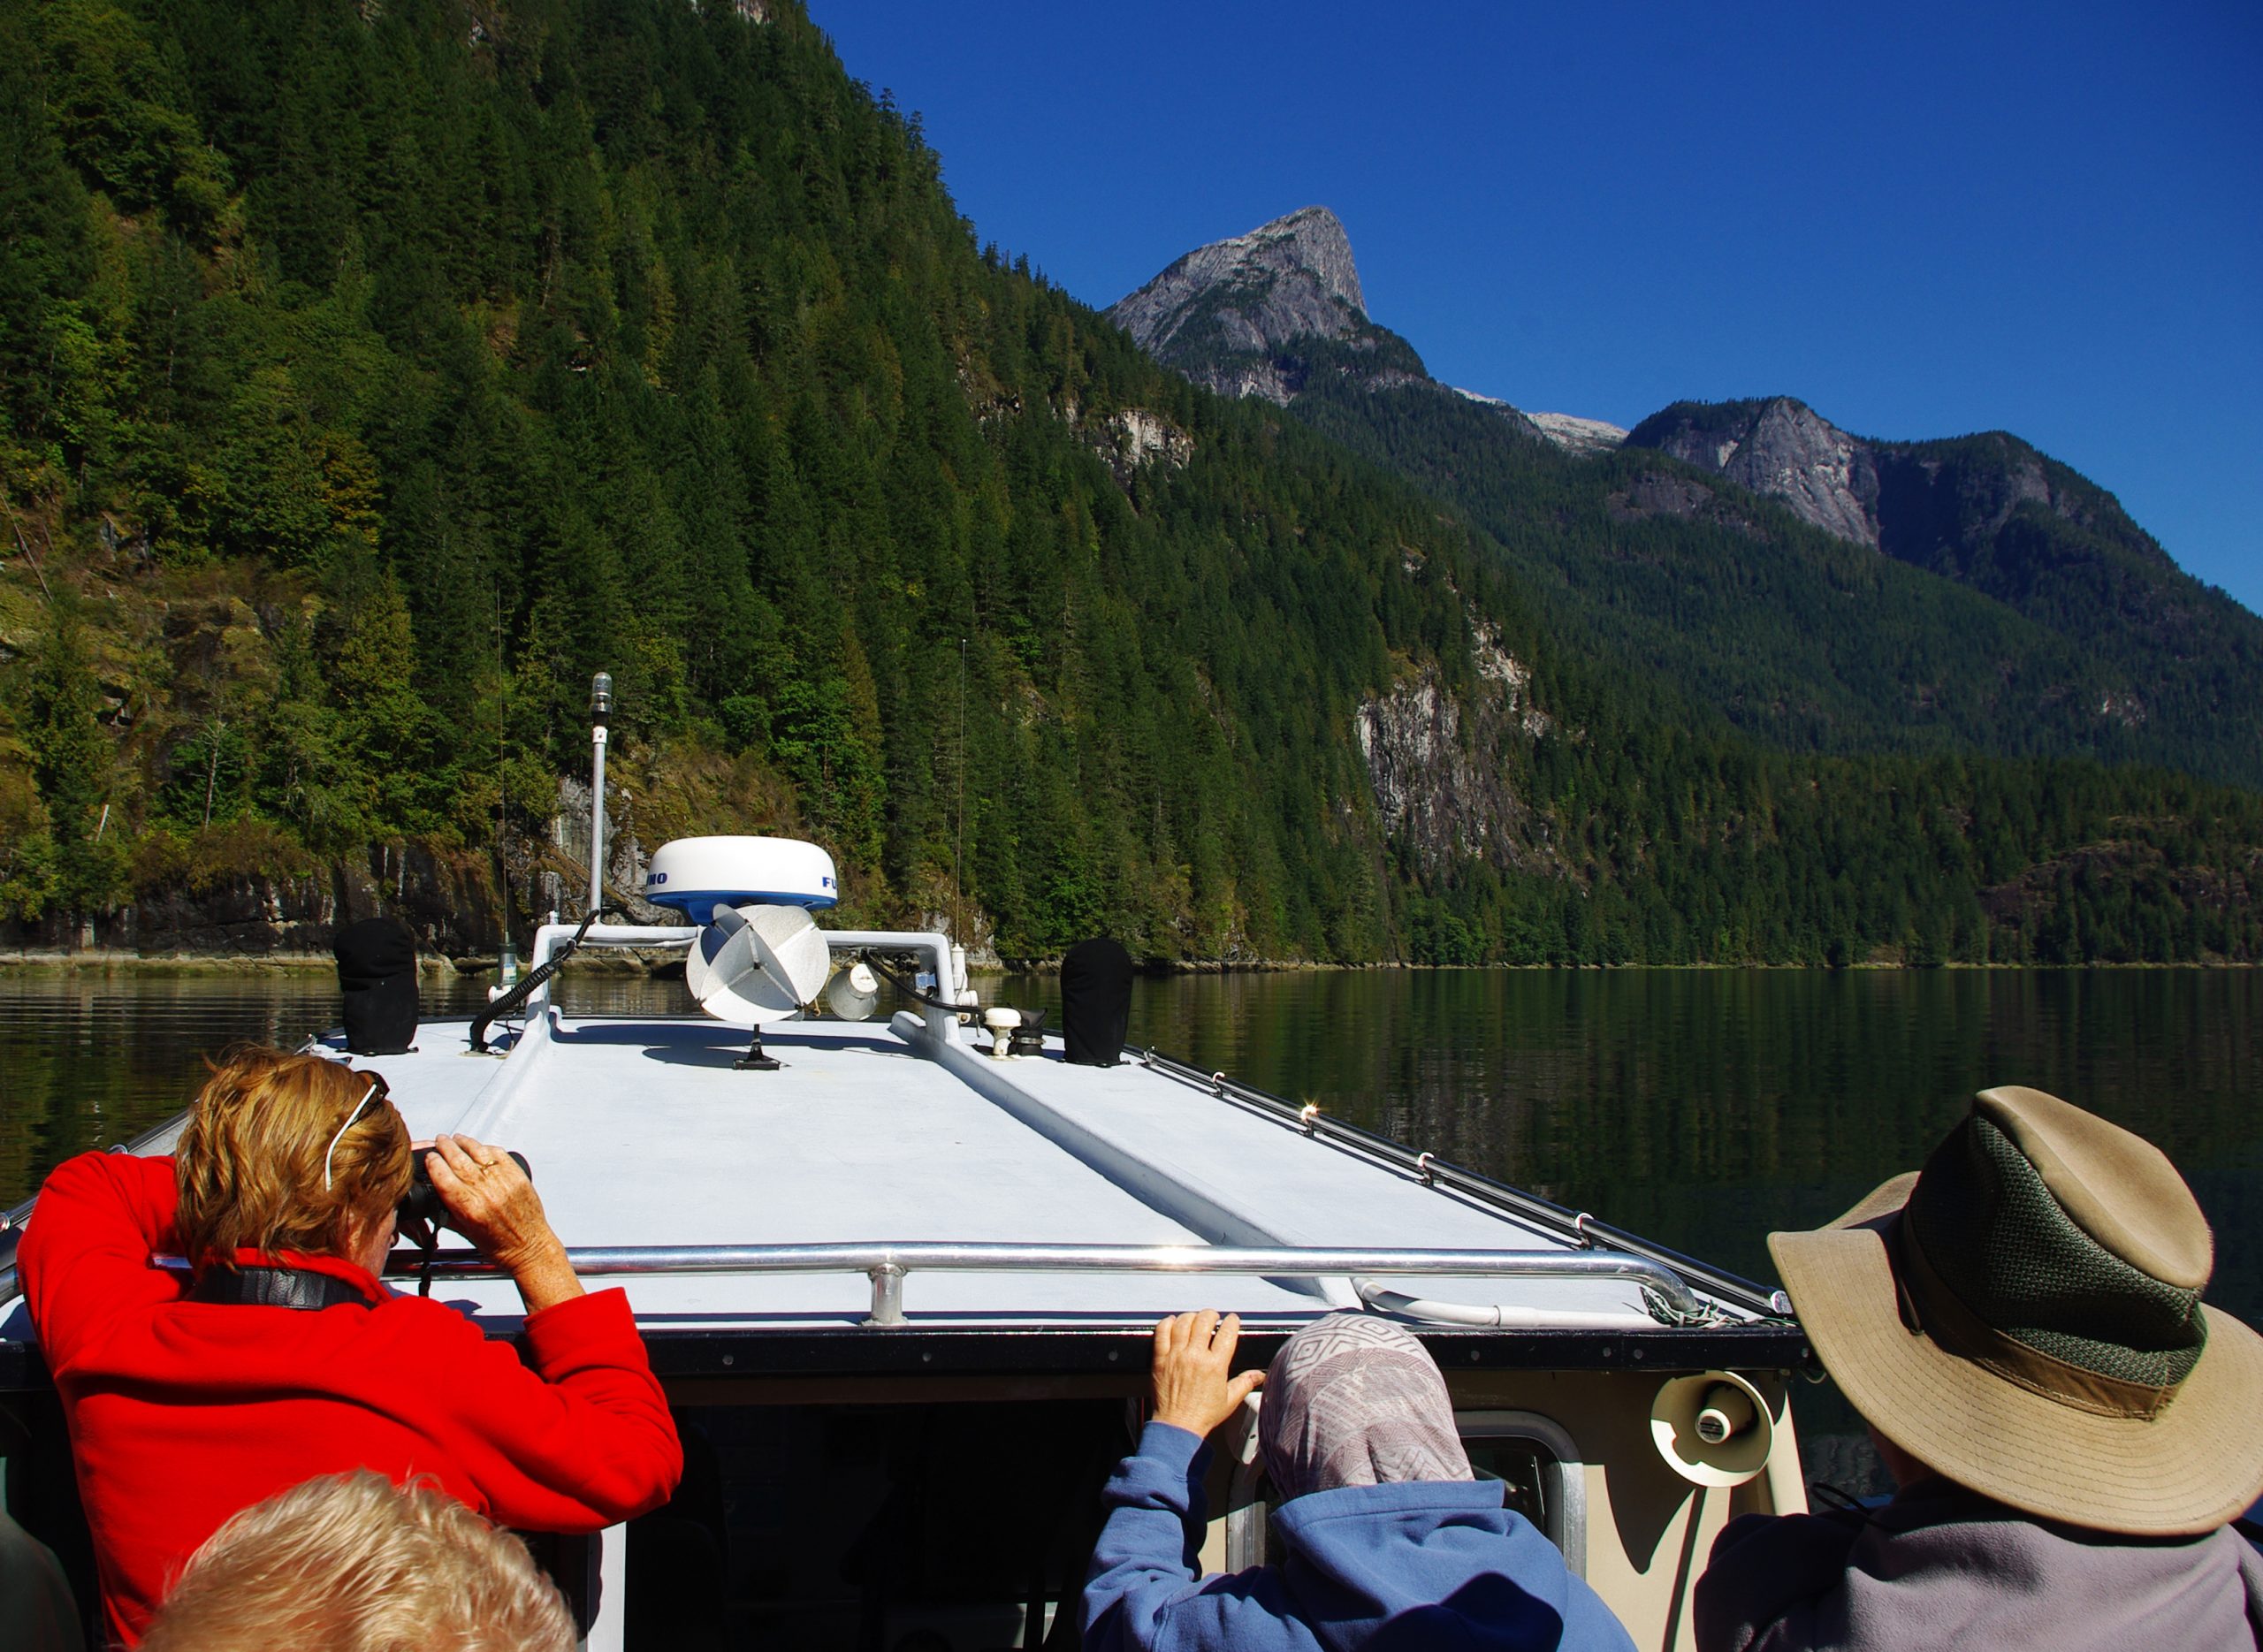 Guests on the tour boat get first view of Mt One Eye, Princess Louisa Inlet